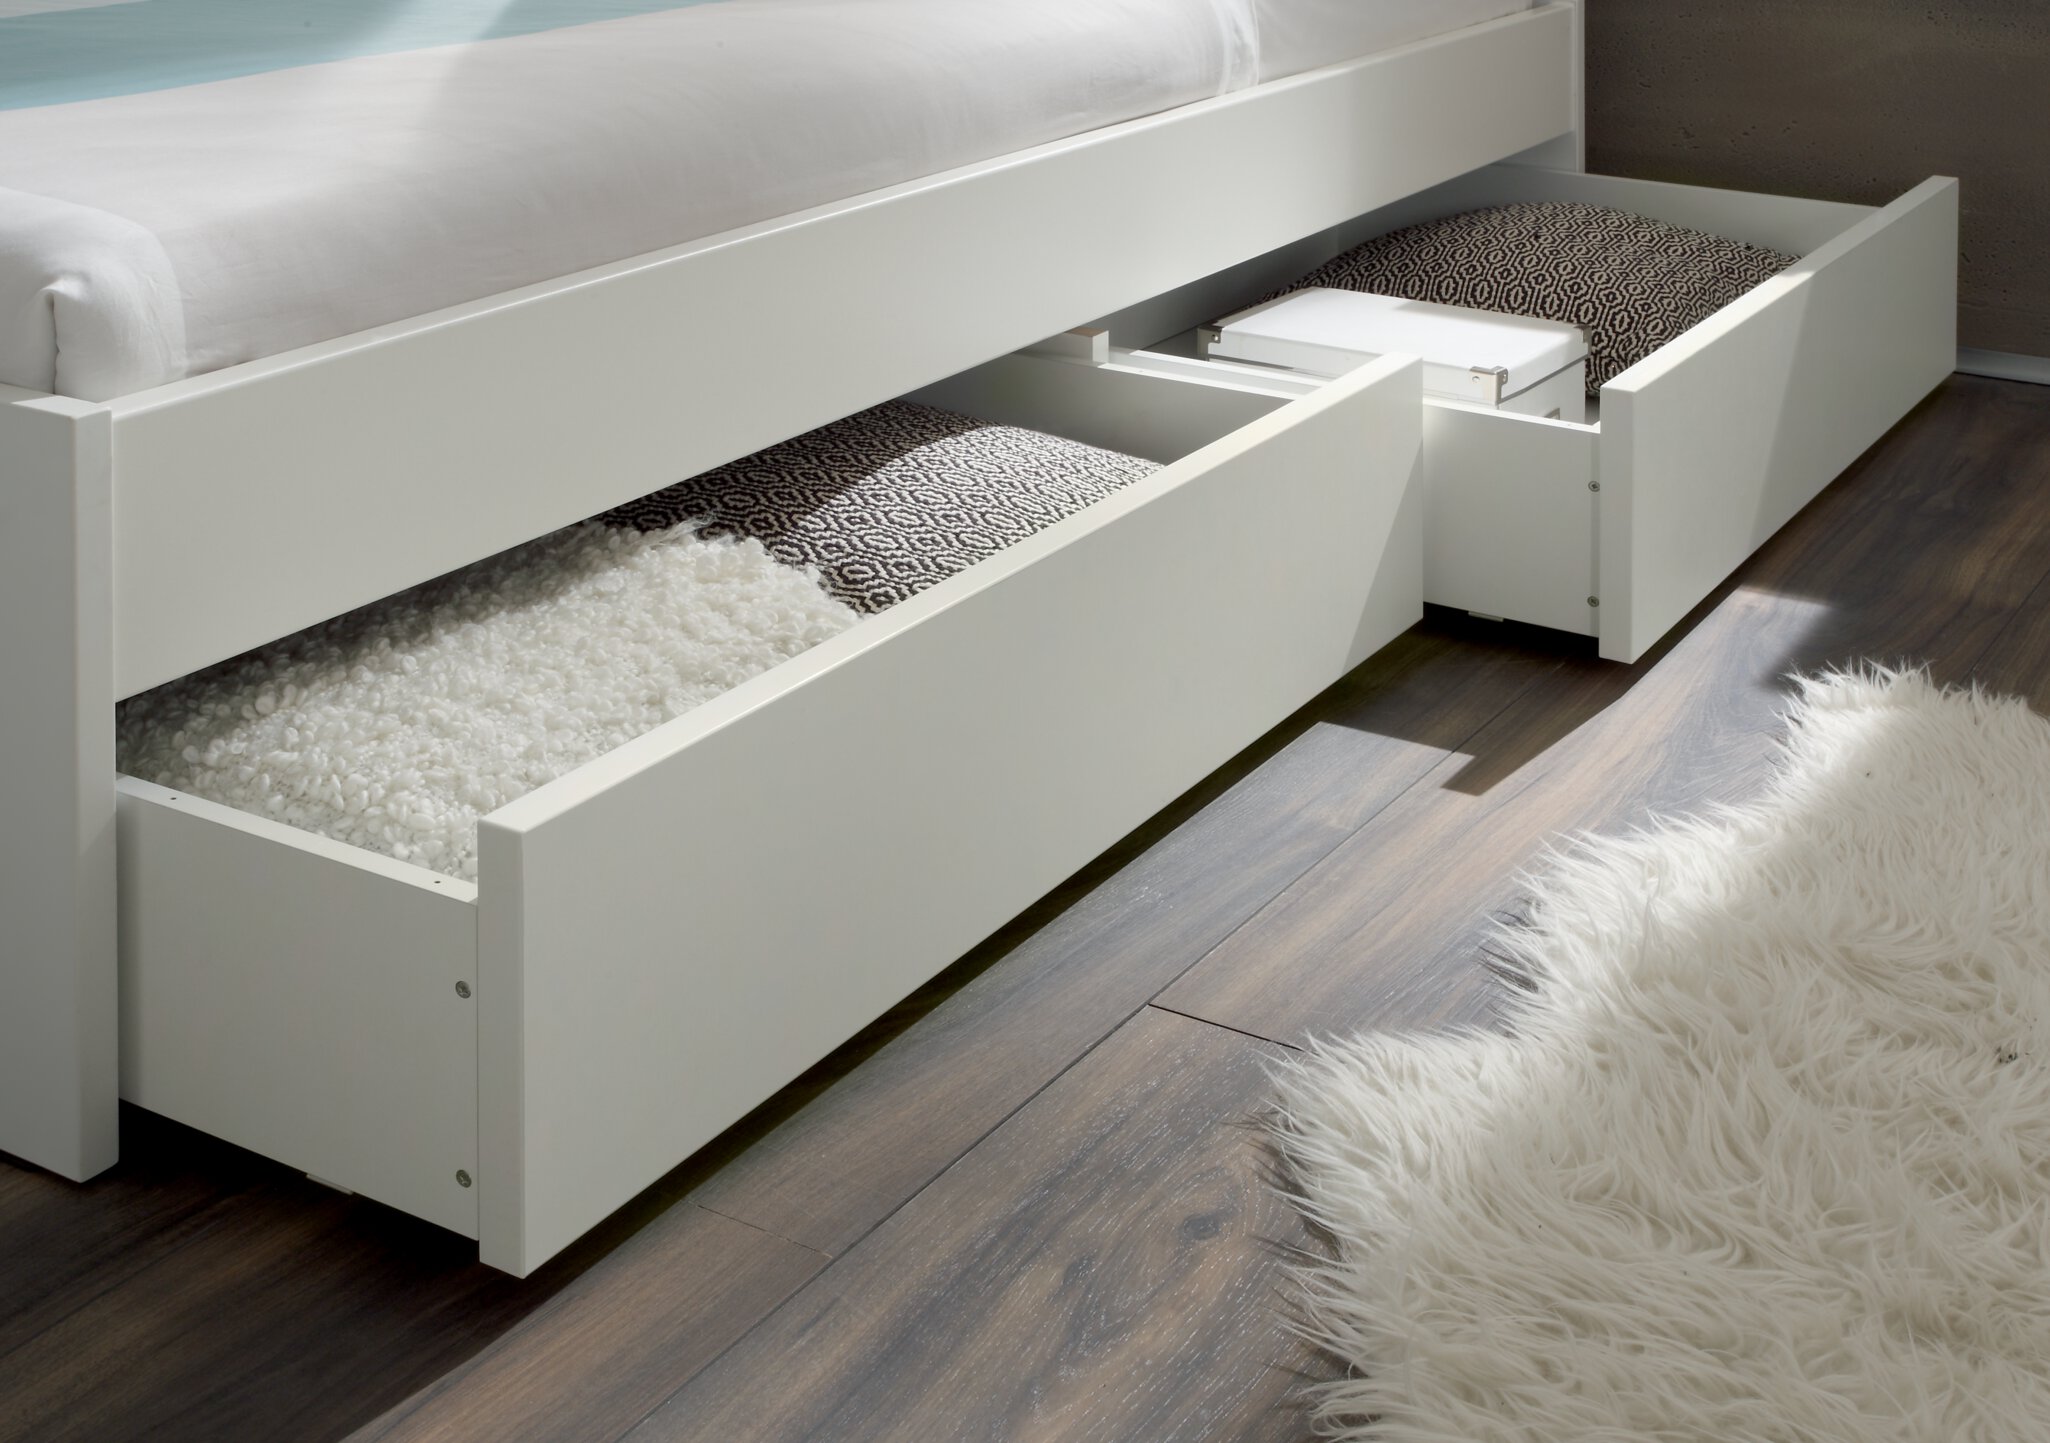 Accessories to beds, headboards, wall panels | HASENA